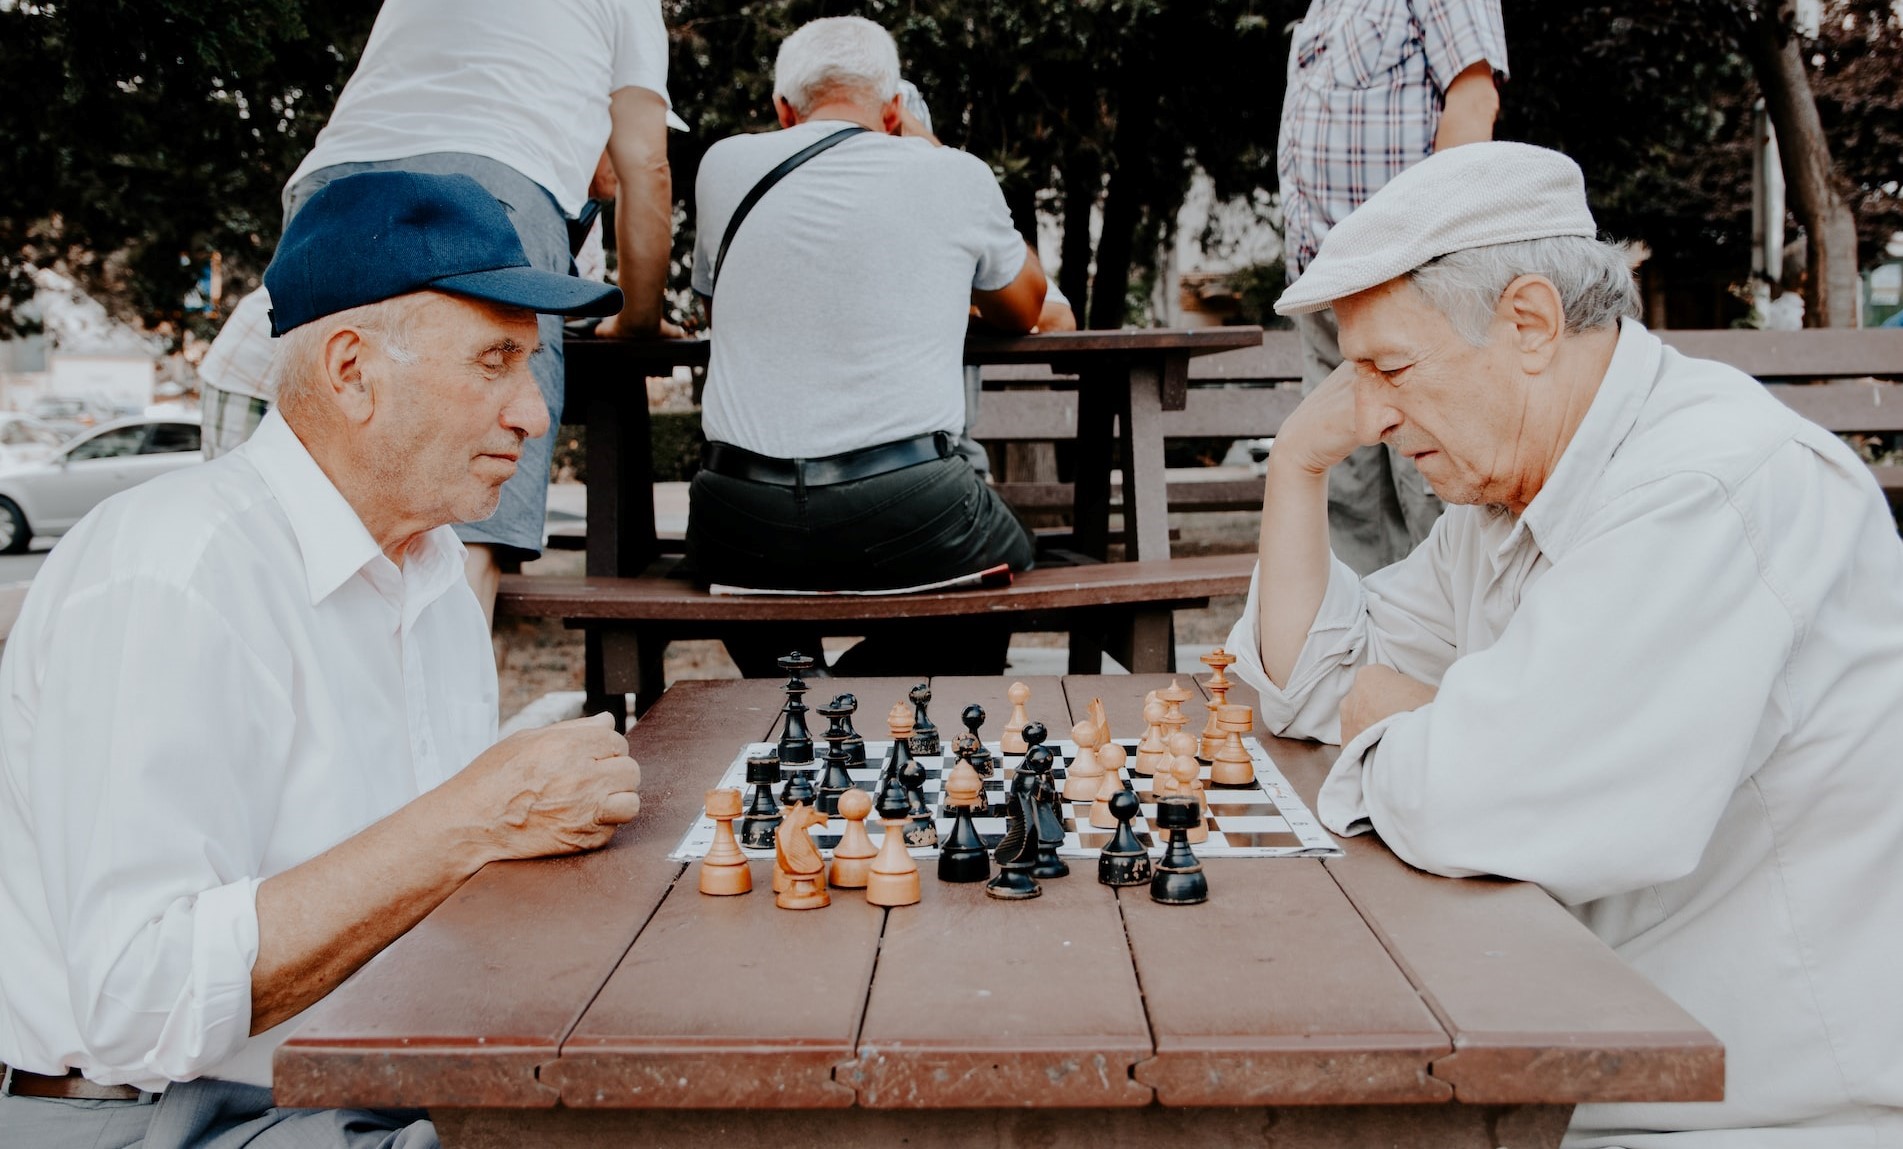 Two seniors (men) playing chess outdoors.